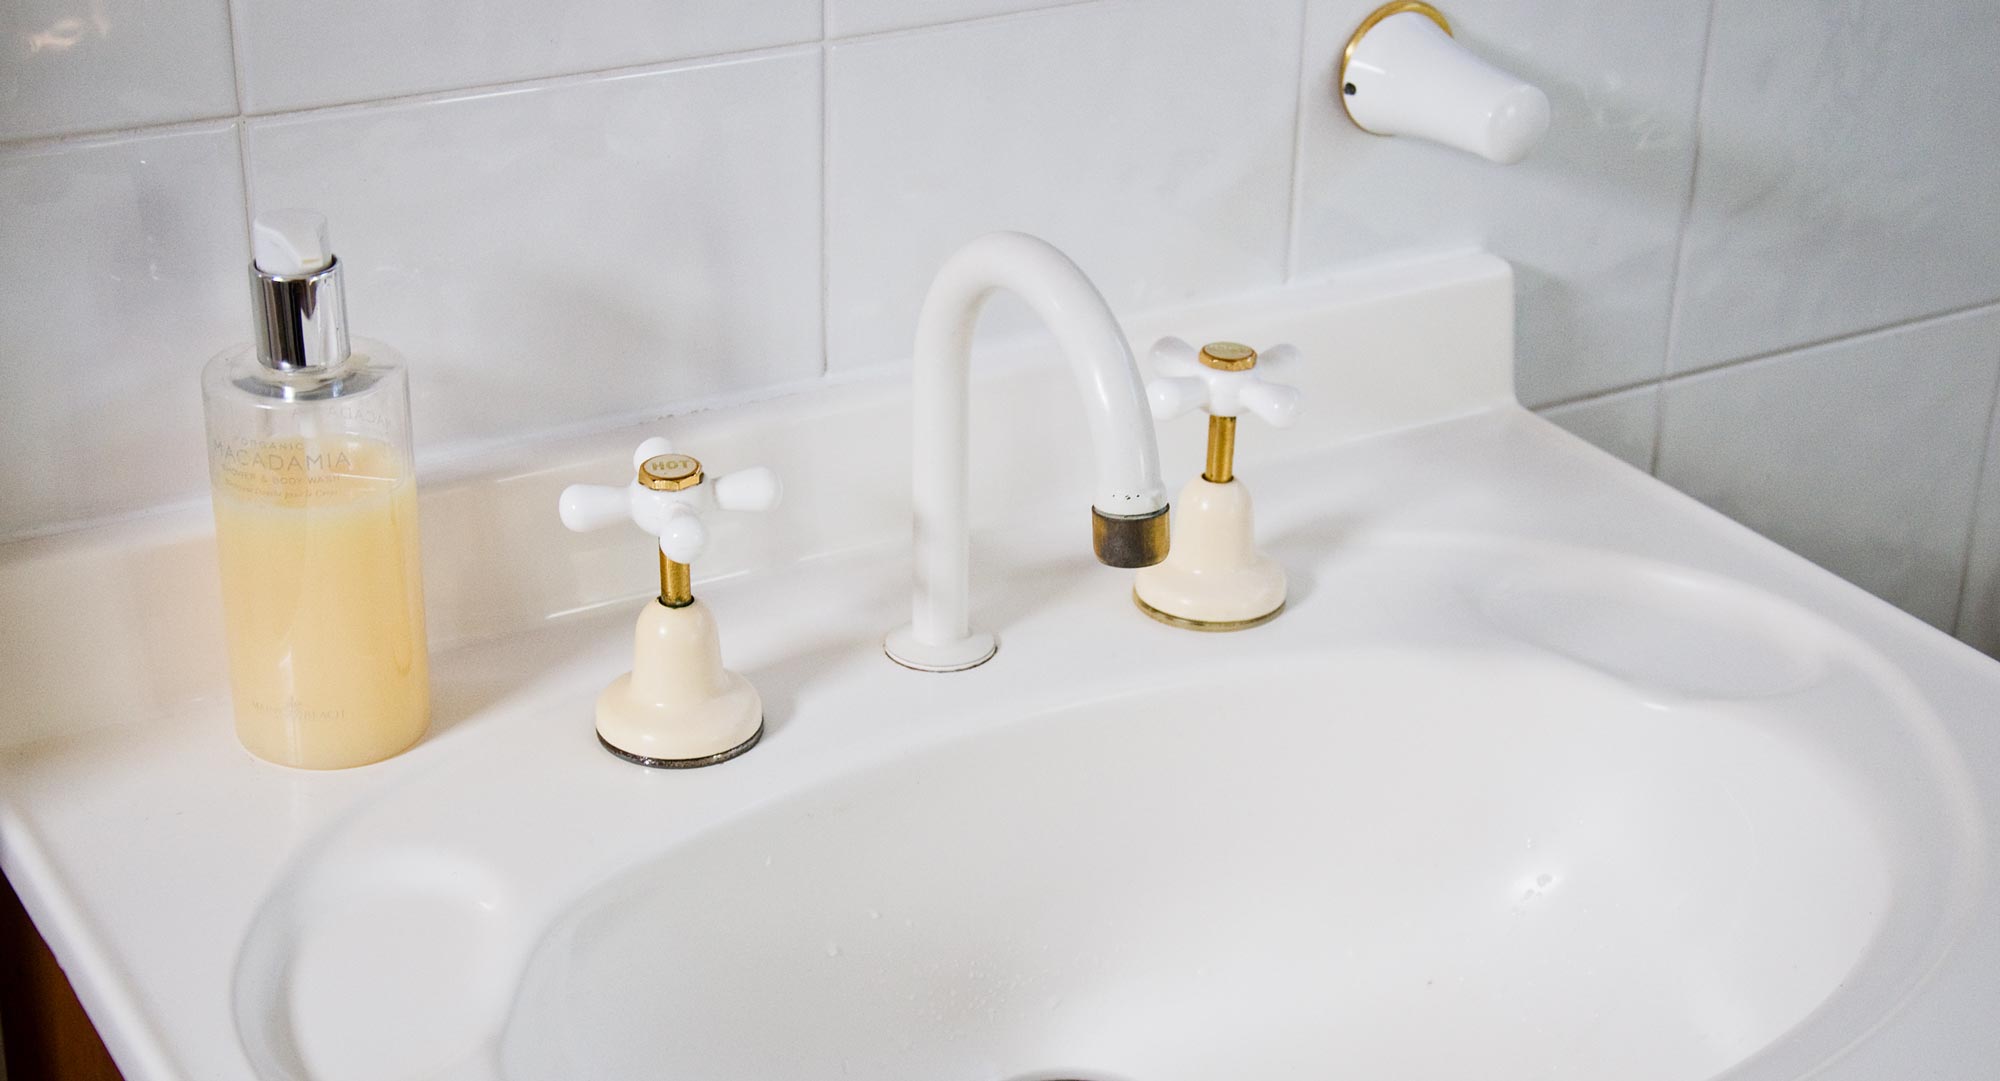 The Diy Guide To Fixing Your Leaking Taps Better Homes And Gardens